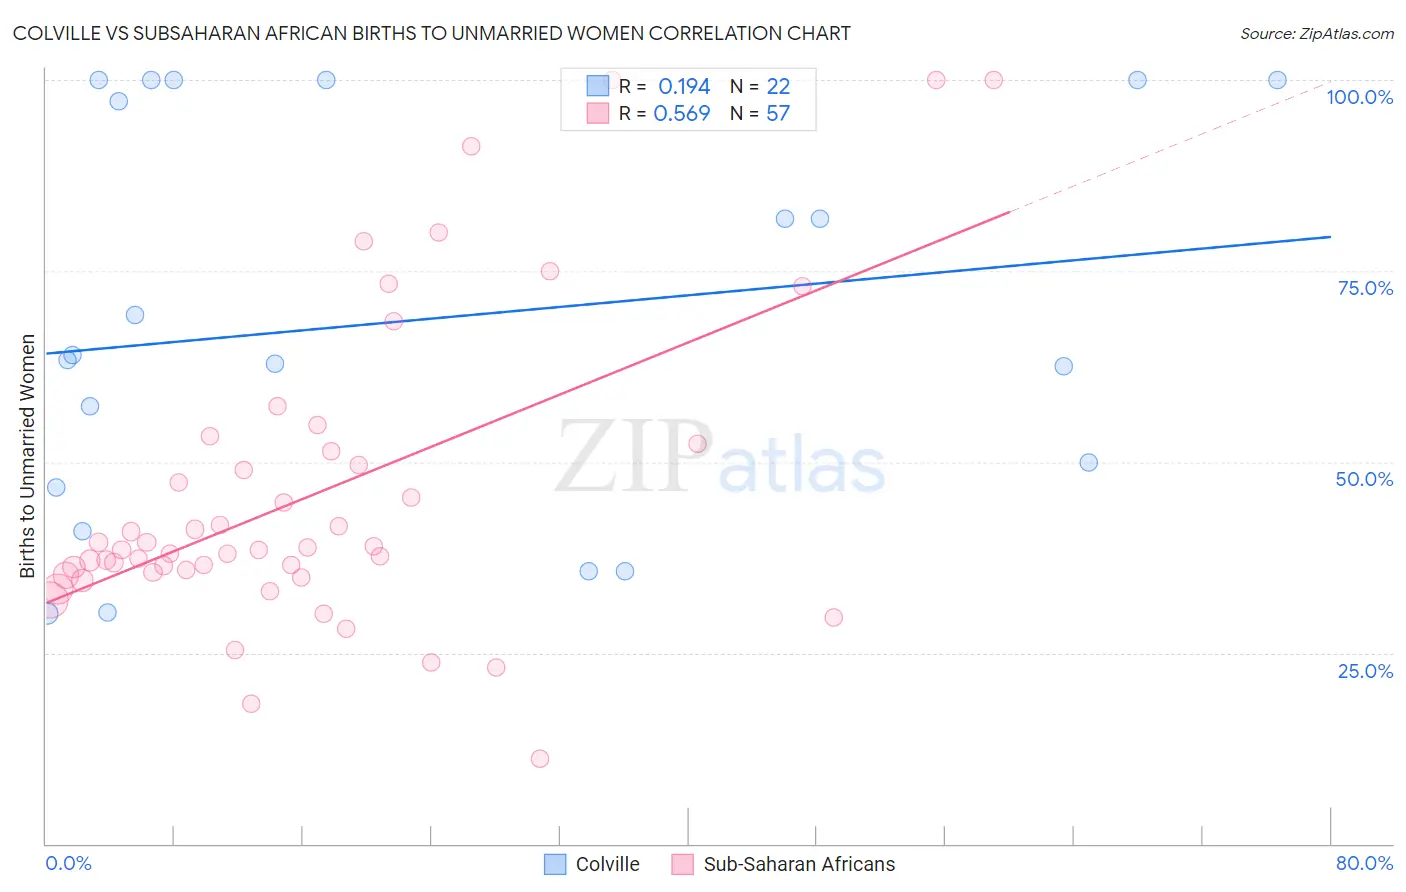 Colville vs Subsaharan African Births to Unmarried Women